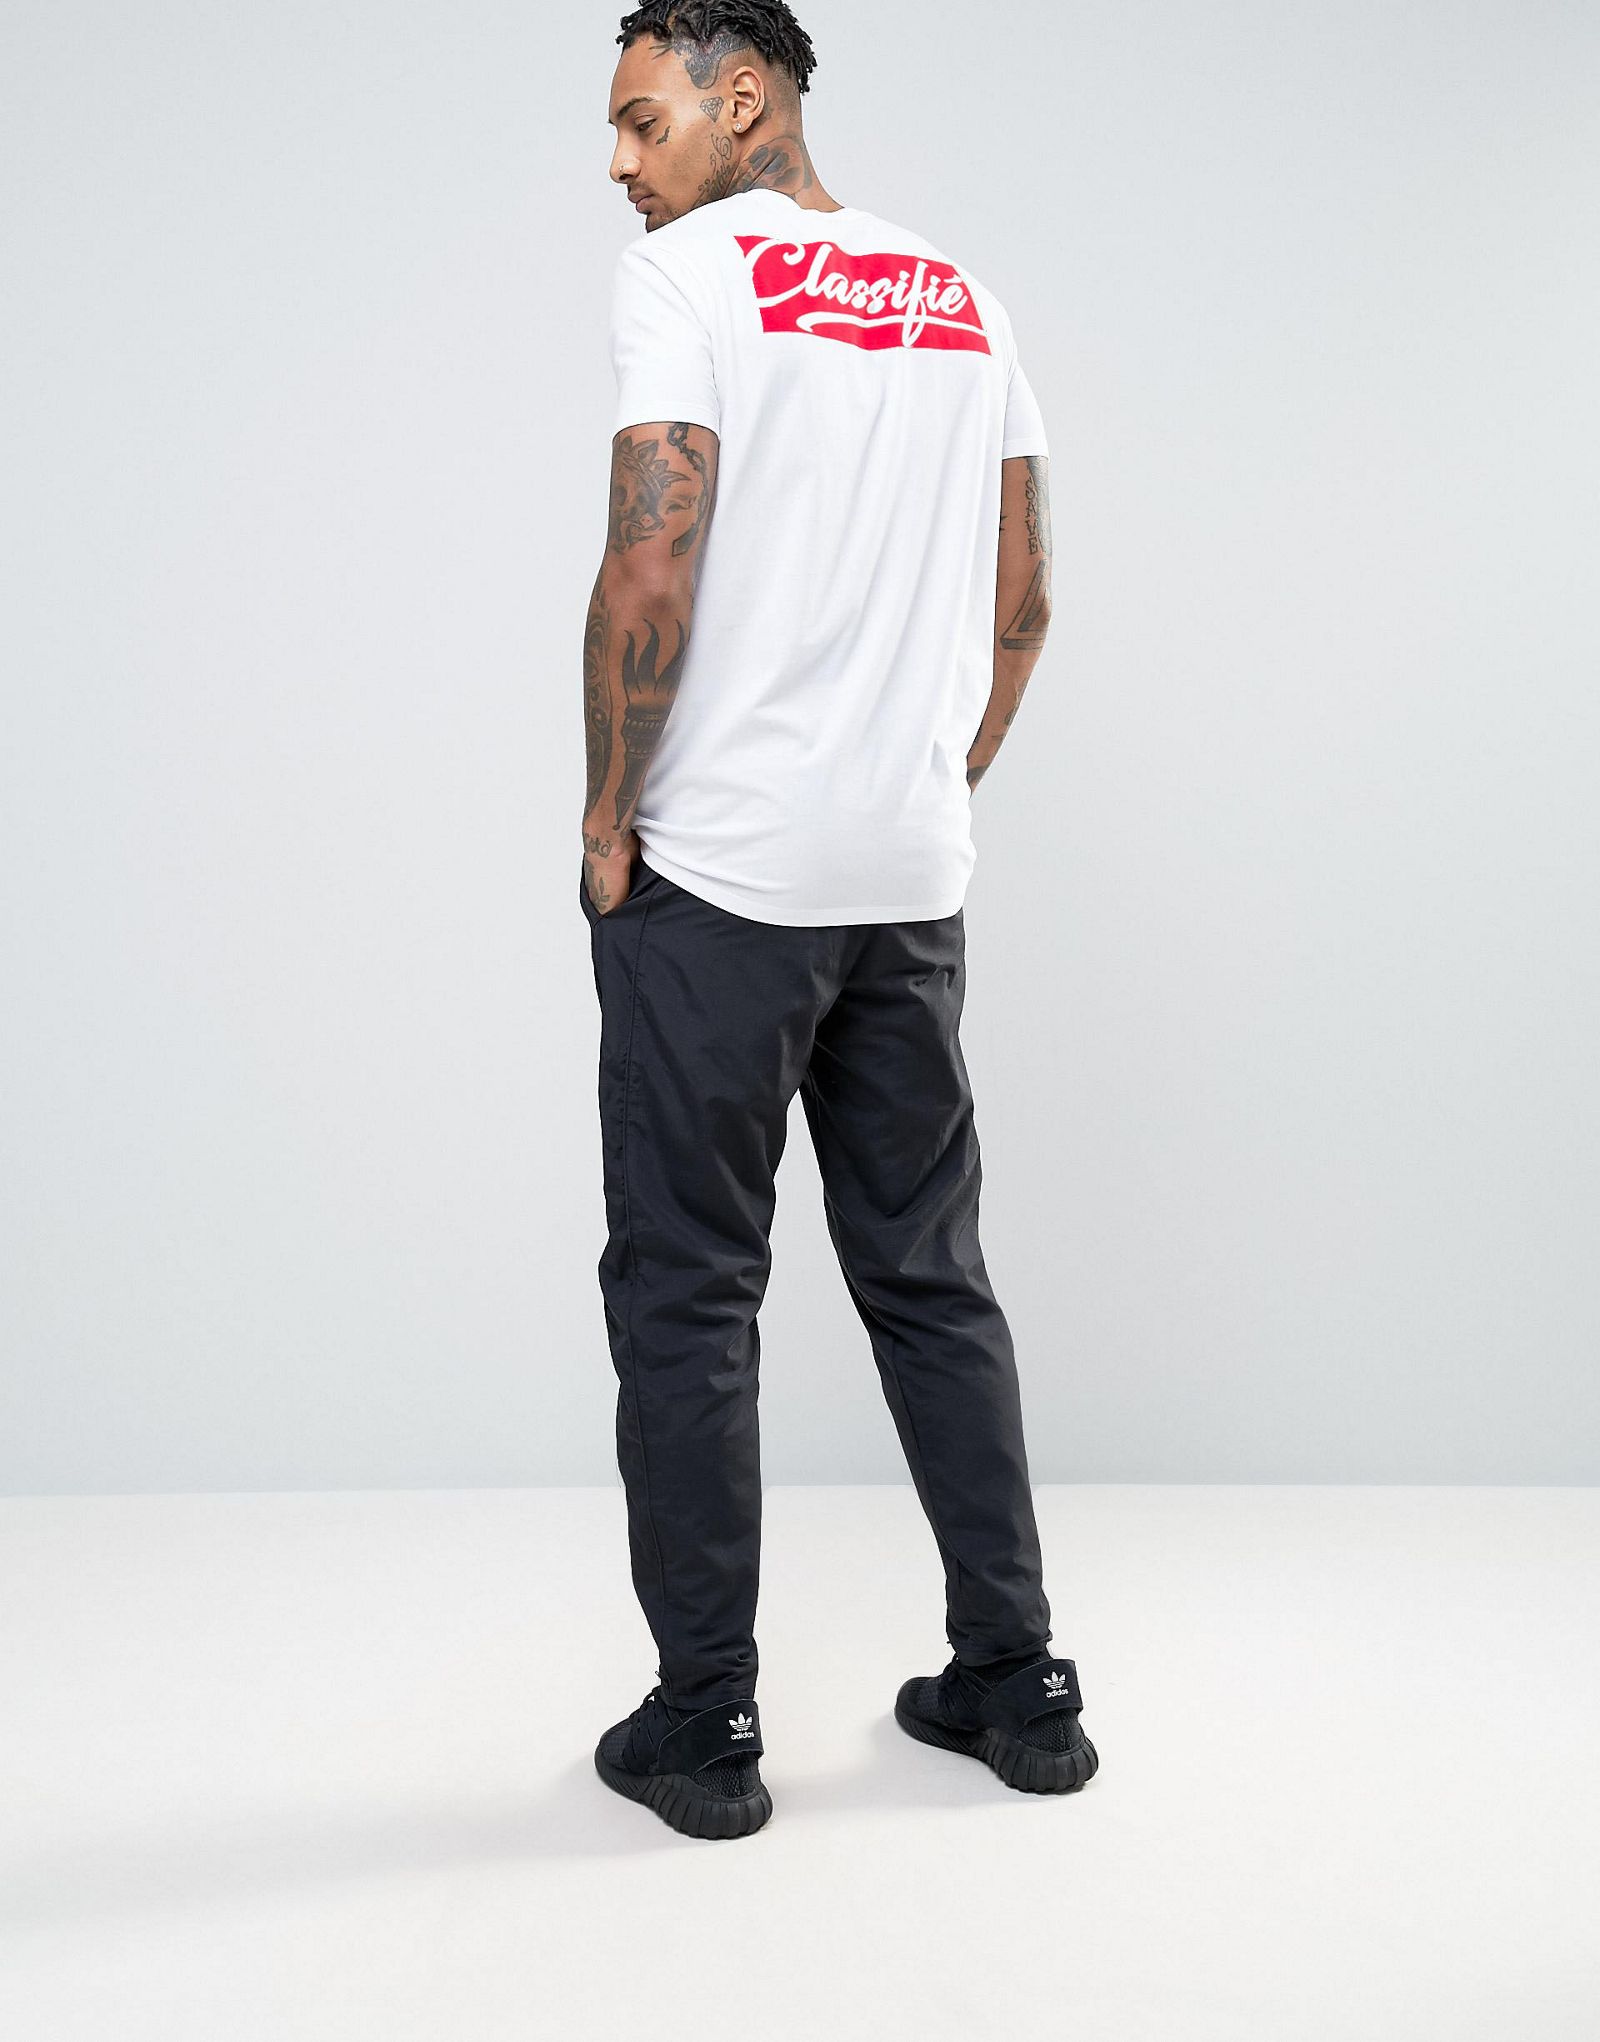 ASOS Longline T-Shirt With Classifie Text Back Print